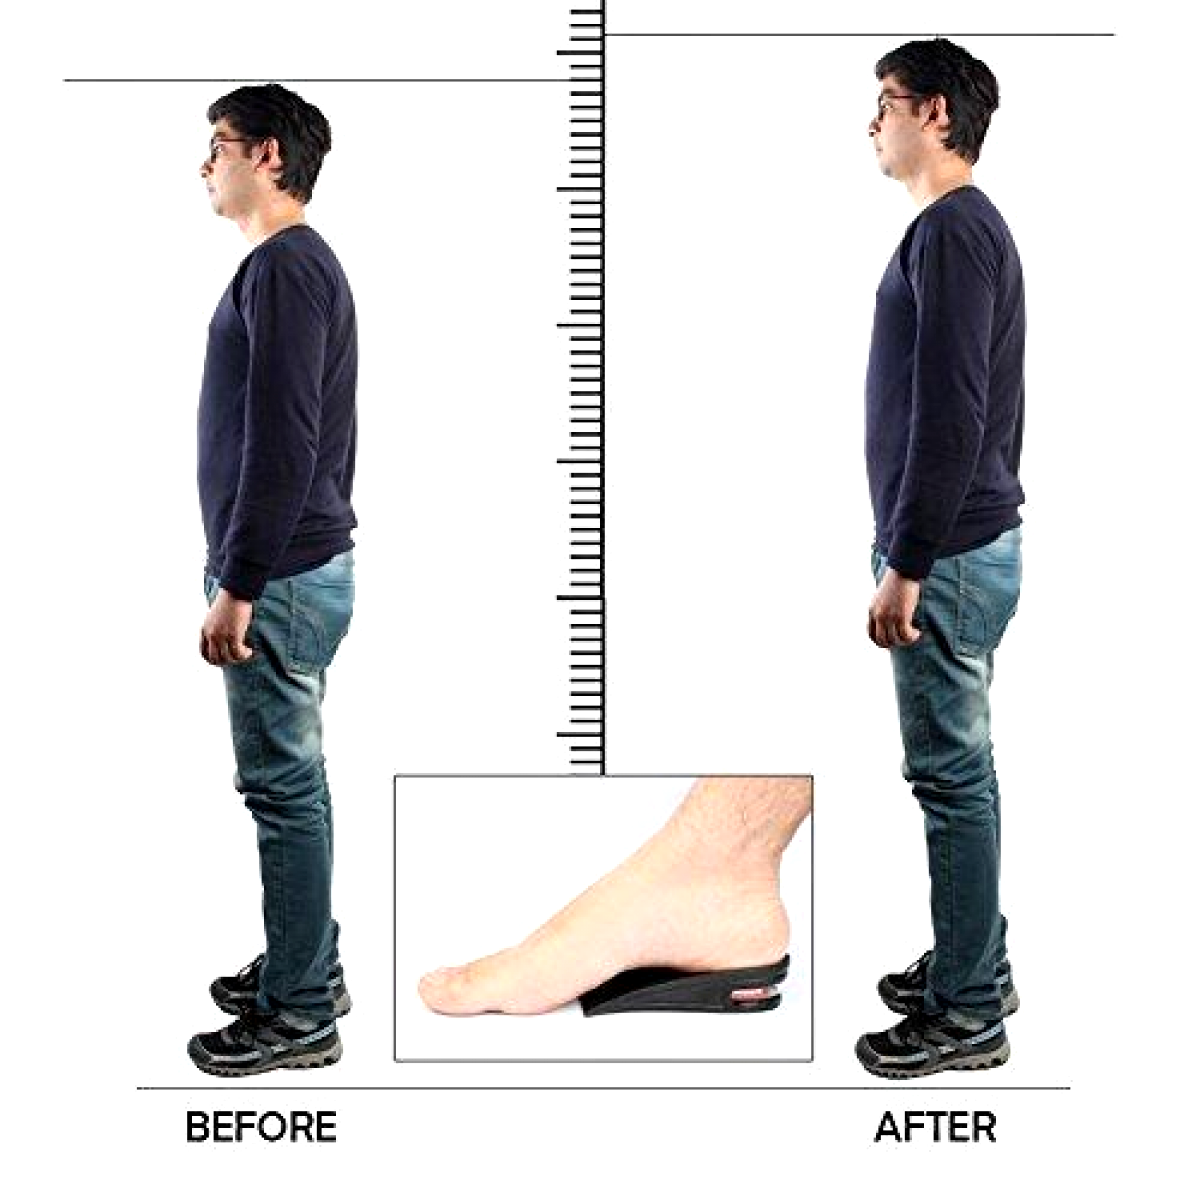 INCREASE YOUR HEIGHT - Muti-Layer Air Cushion Height Elevator Shoe Insole